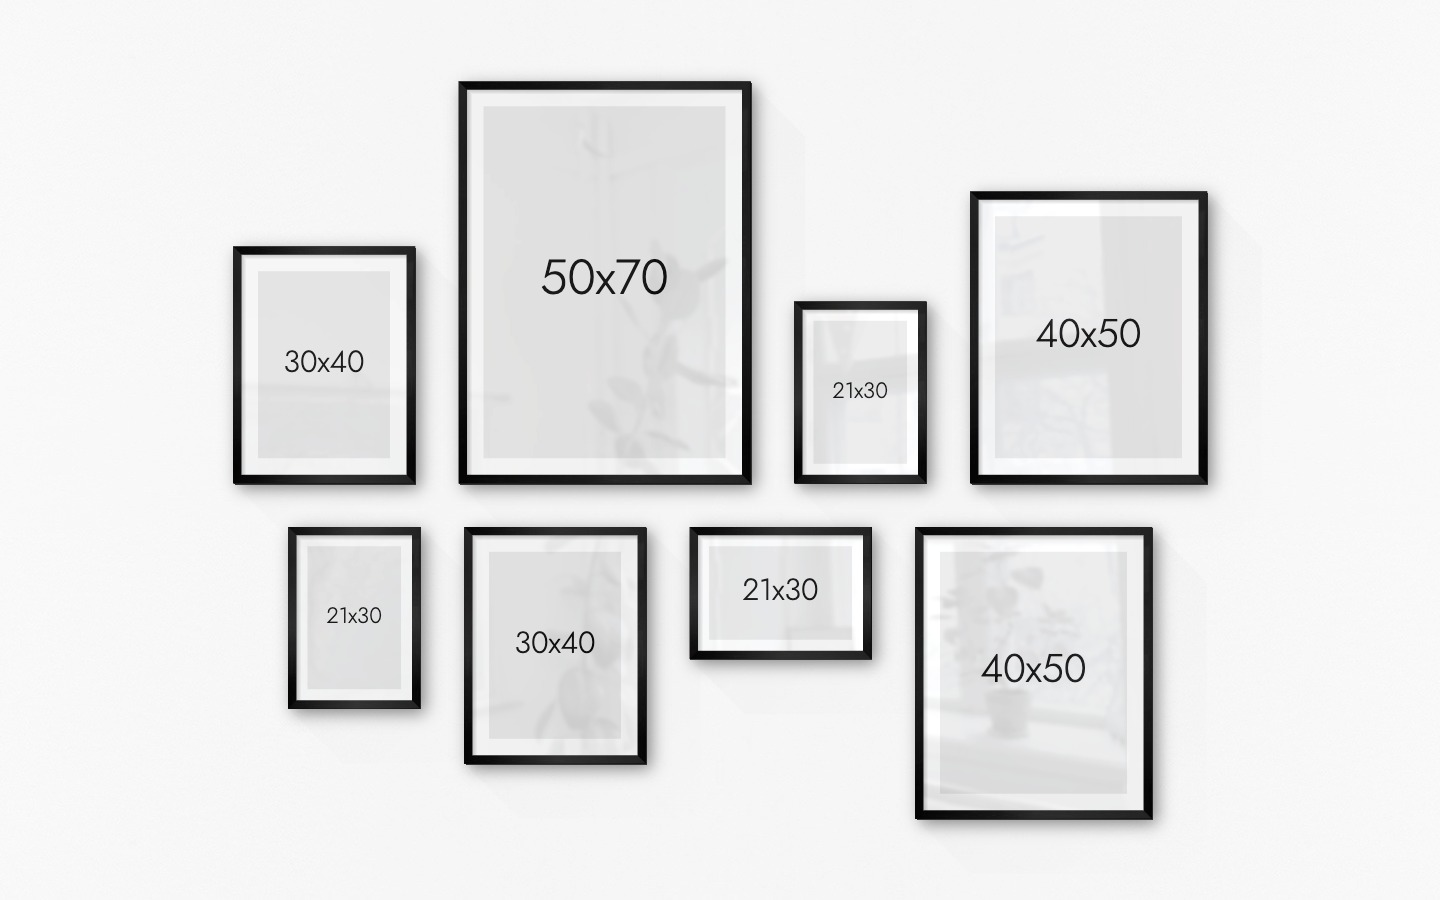 Gallery wall with picture frames in black in sizes 30x40, 50x70, 21x30 and 40x50